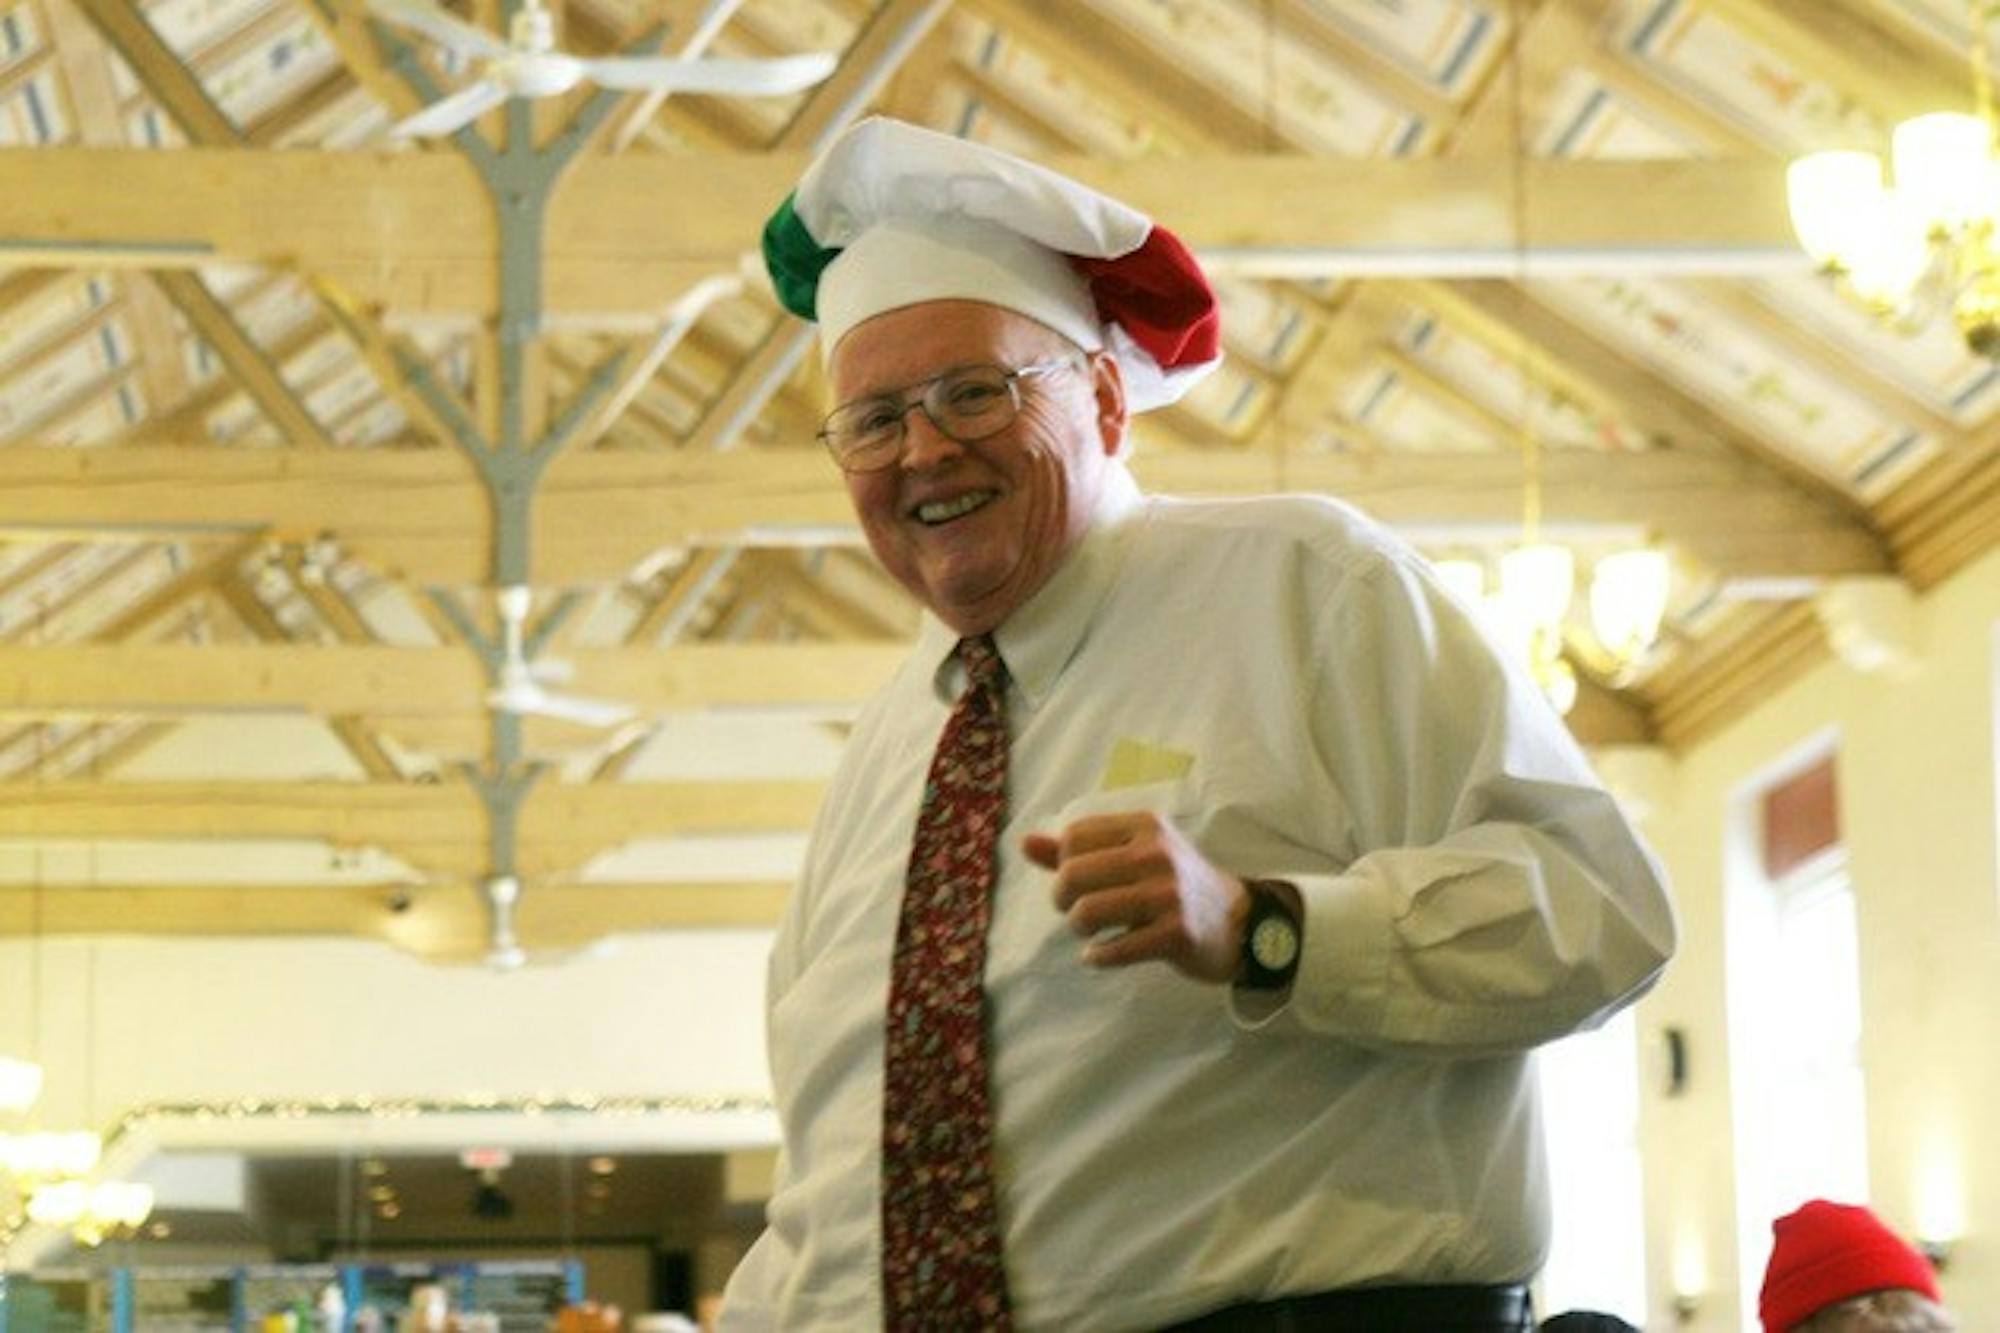 Larry James shows off a chef's hat bearing the colors of the Italian national flag in Food Court during one of the many themed dinner events he hosted over the course of his seven years at the College.